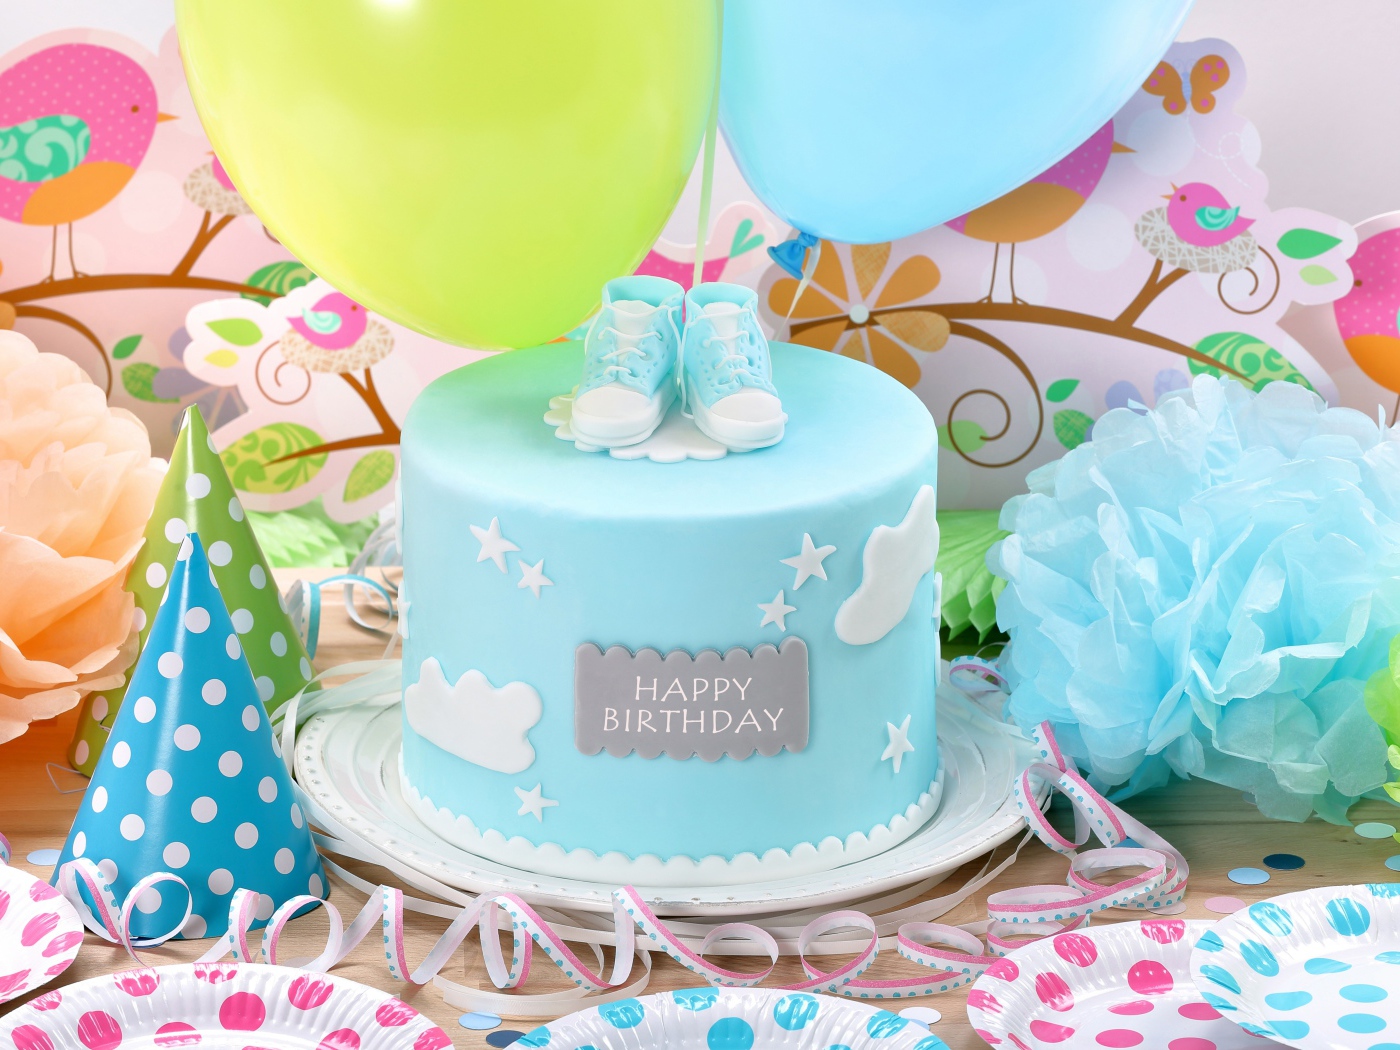 Beautiful blue cake and decoration for boy's birthday